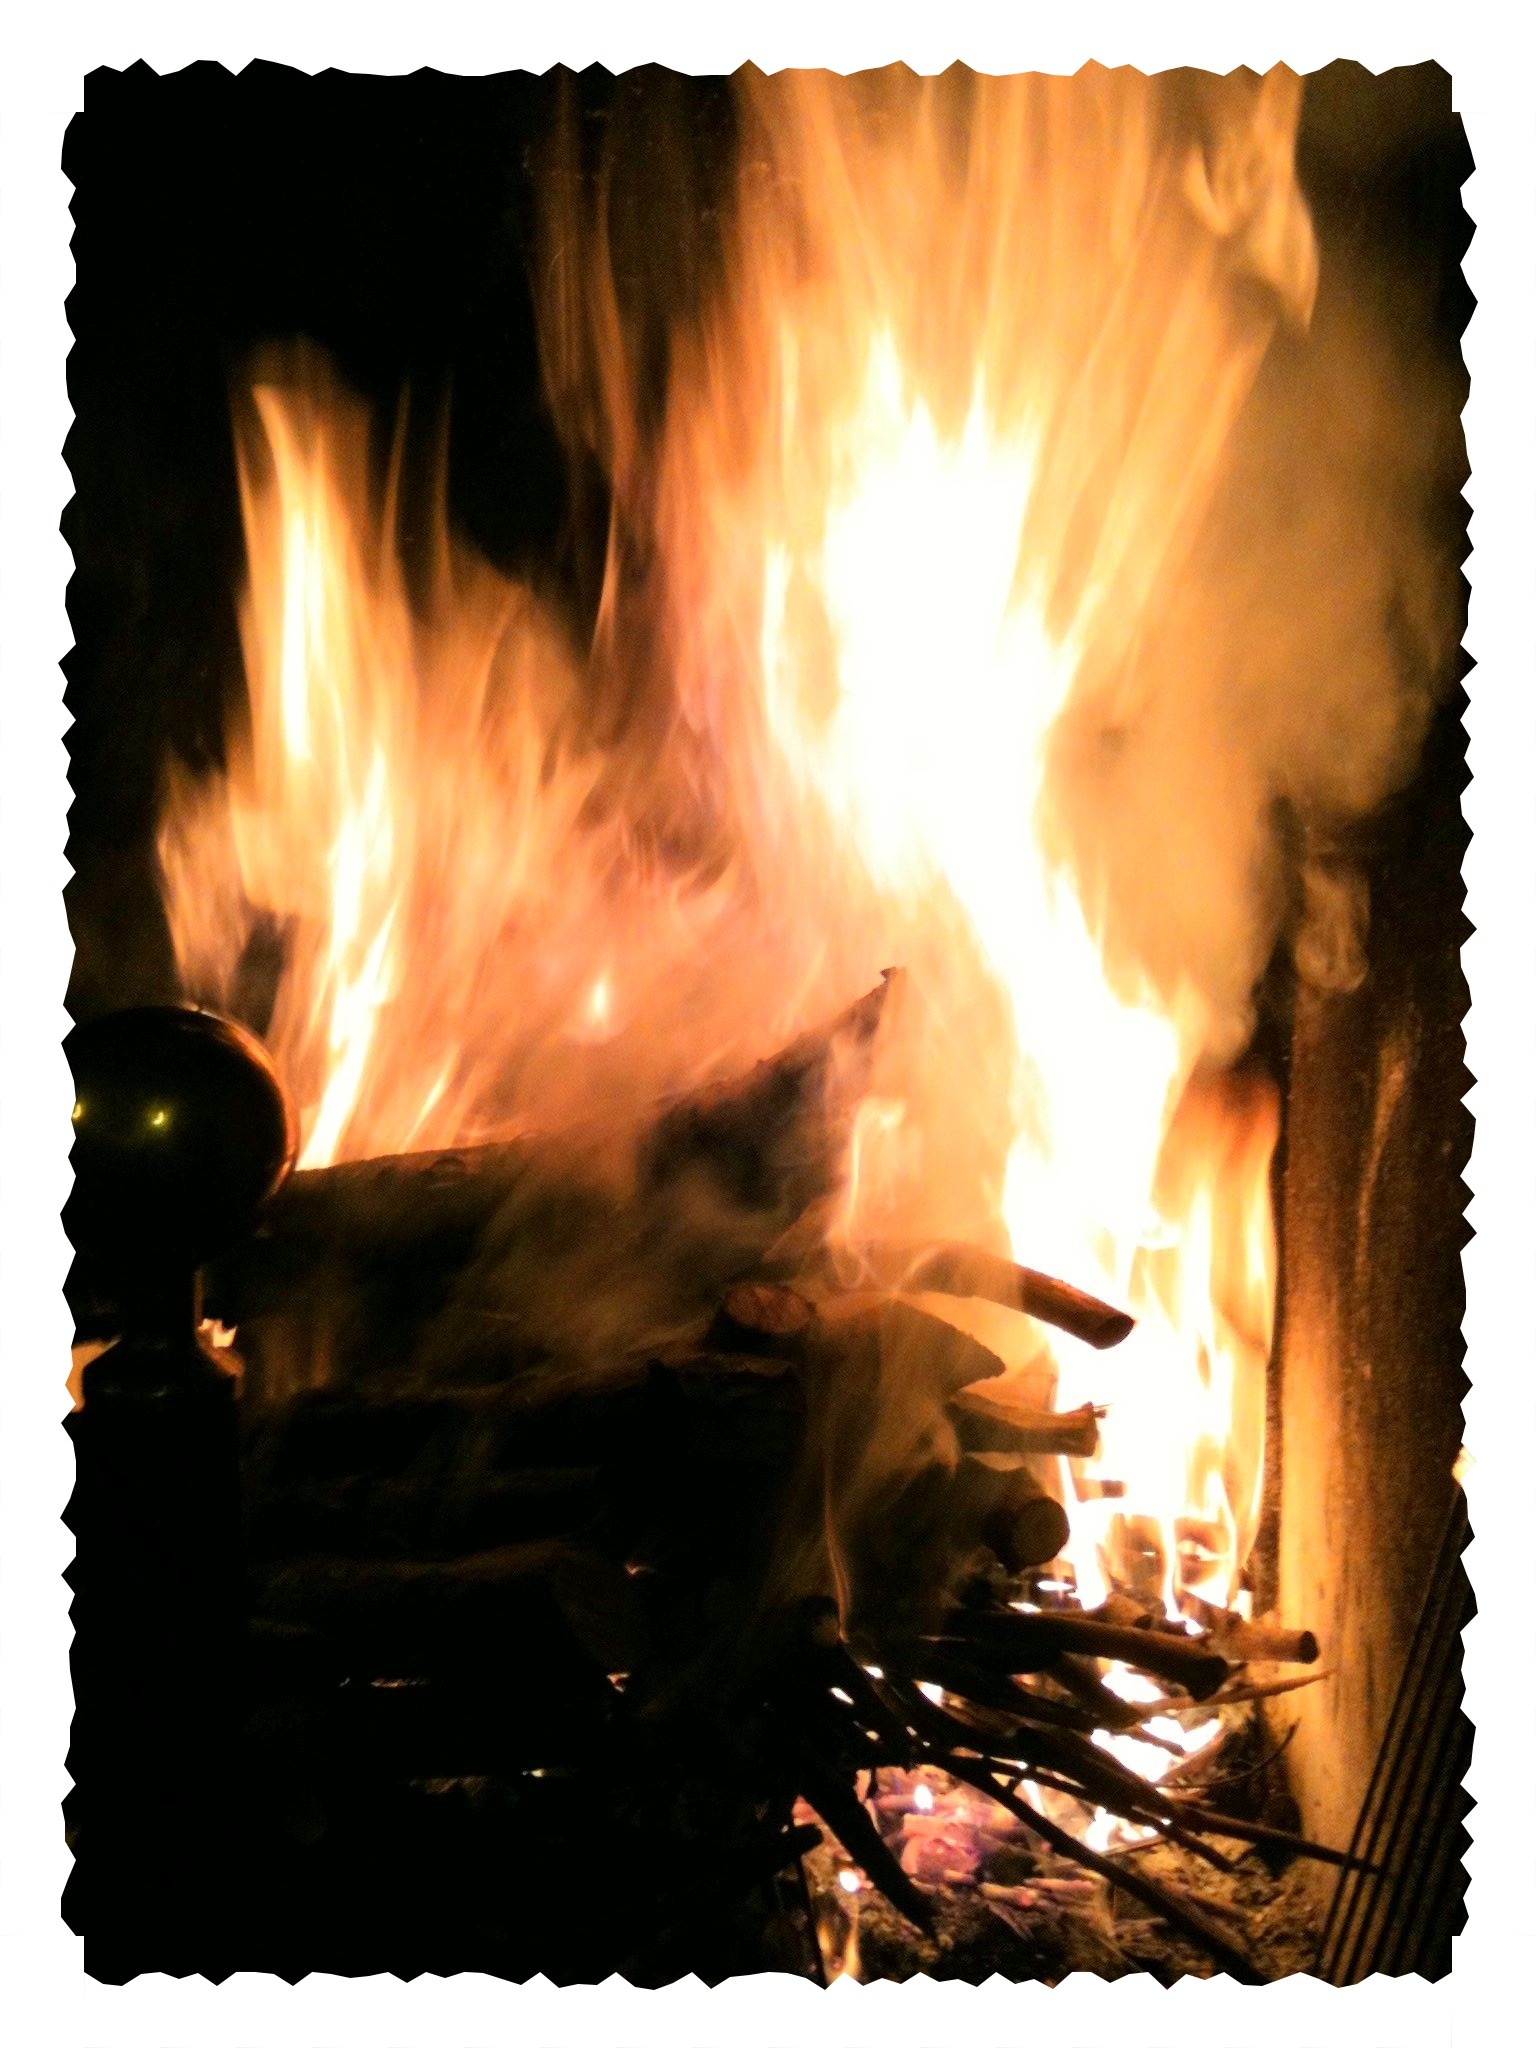 The Fire...